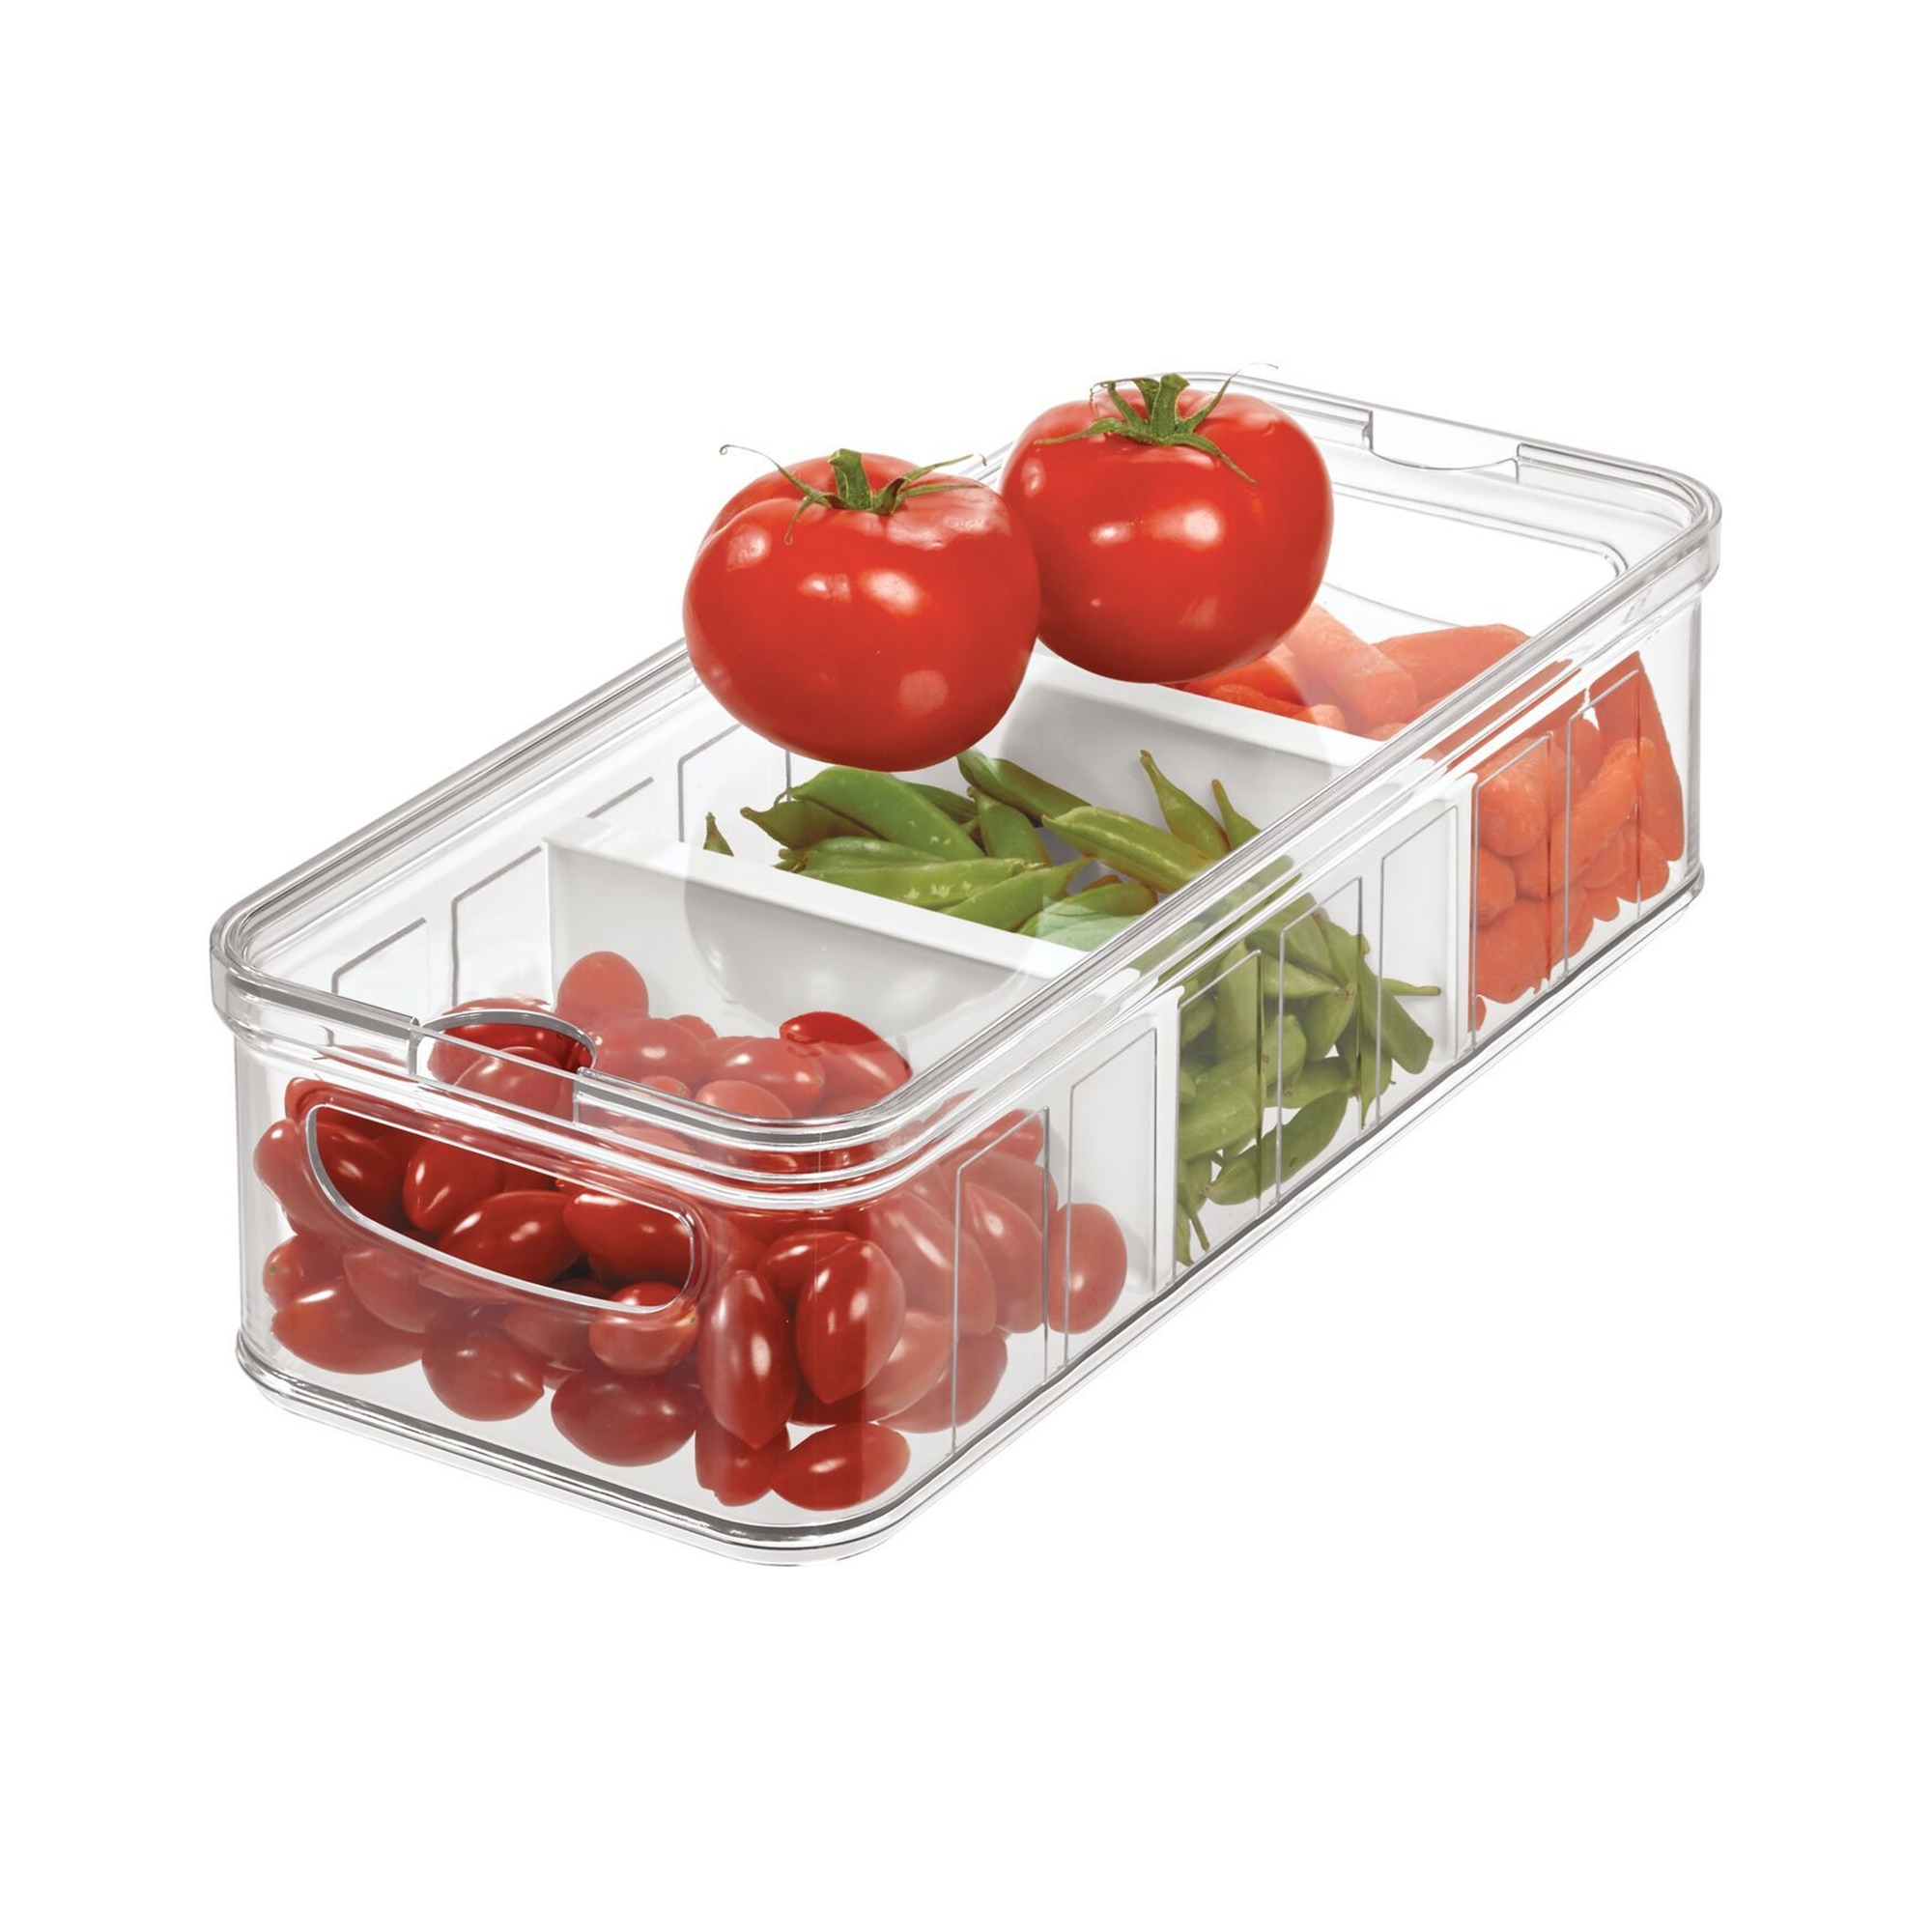 iDesign Crisp Large Bin with Dividers Clear Image 2